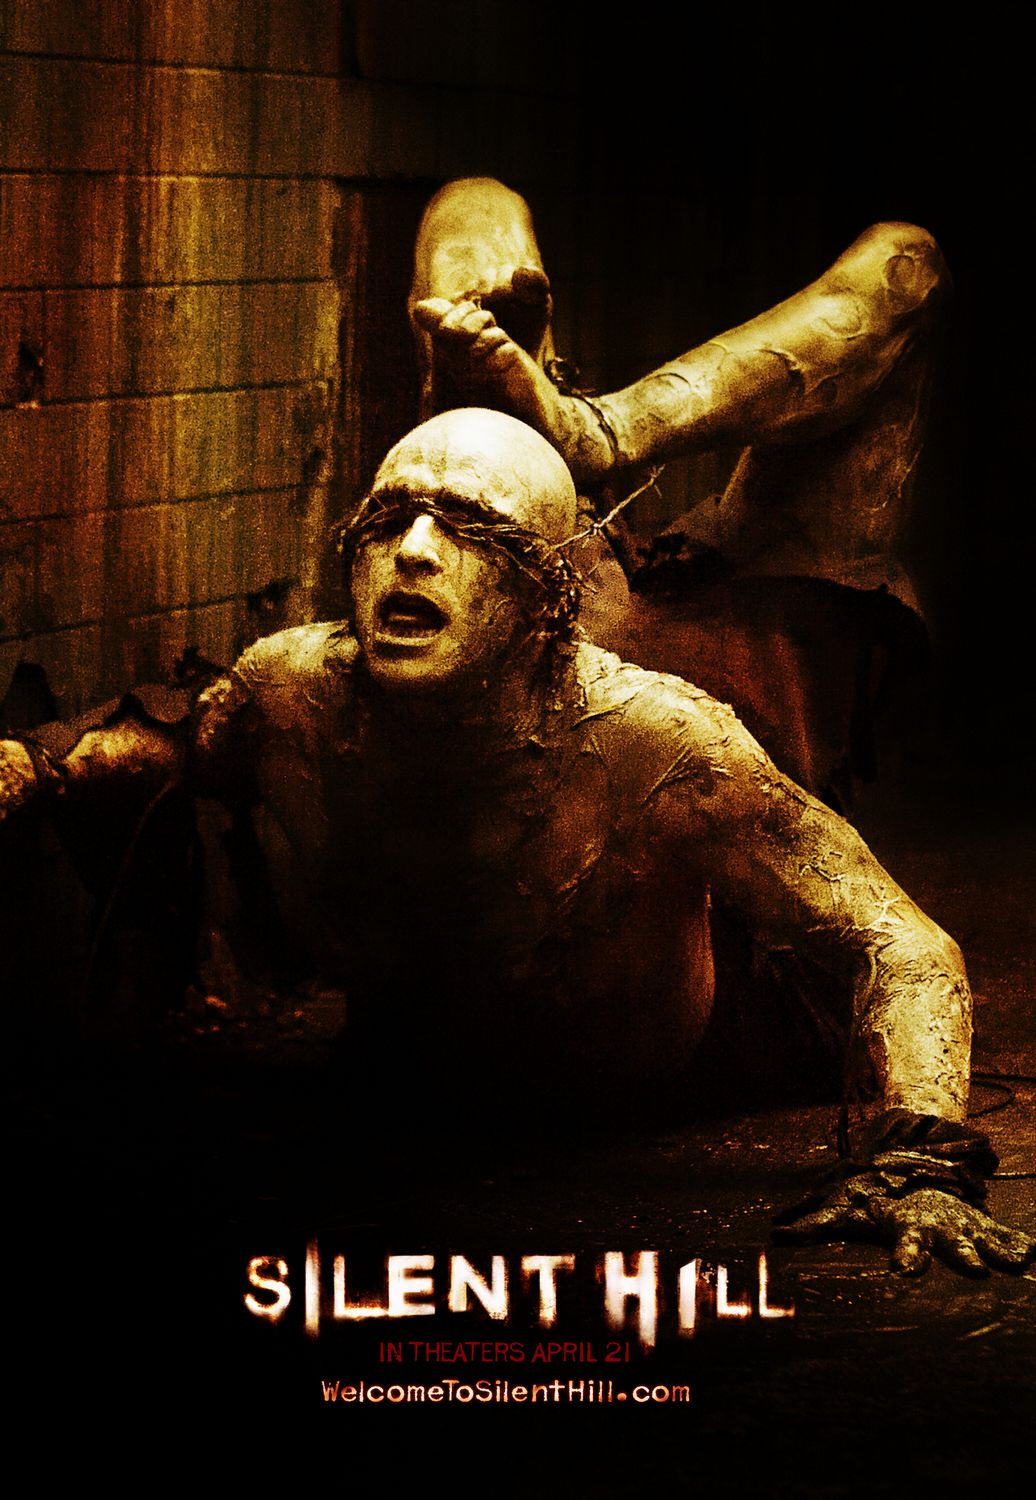 Extra Large Movie Poster Image for Silent Hill (#10 of 11)